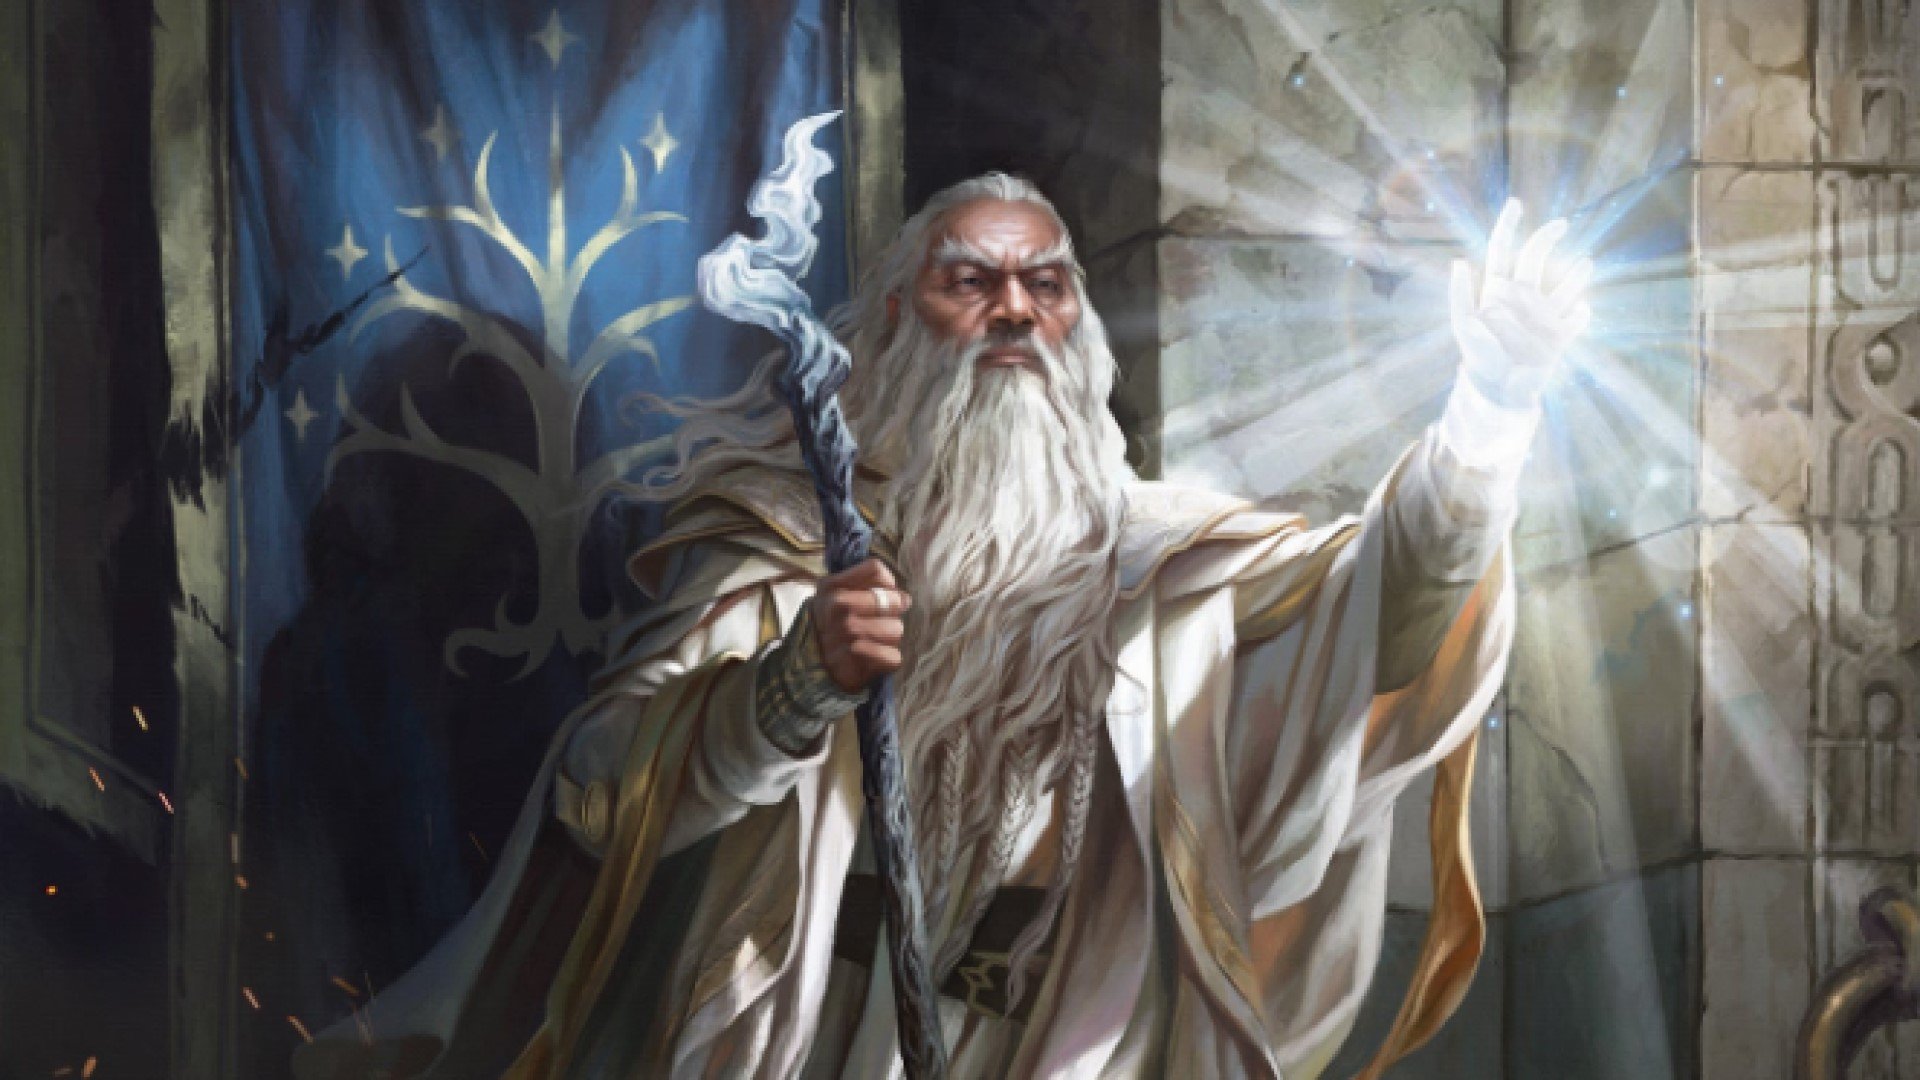 MTG Lord of the Rings artwork of Gandalf the White